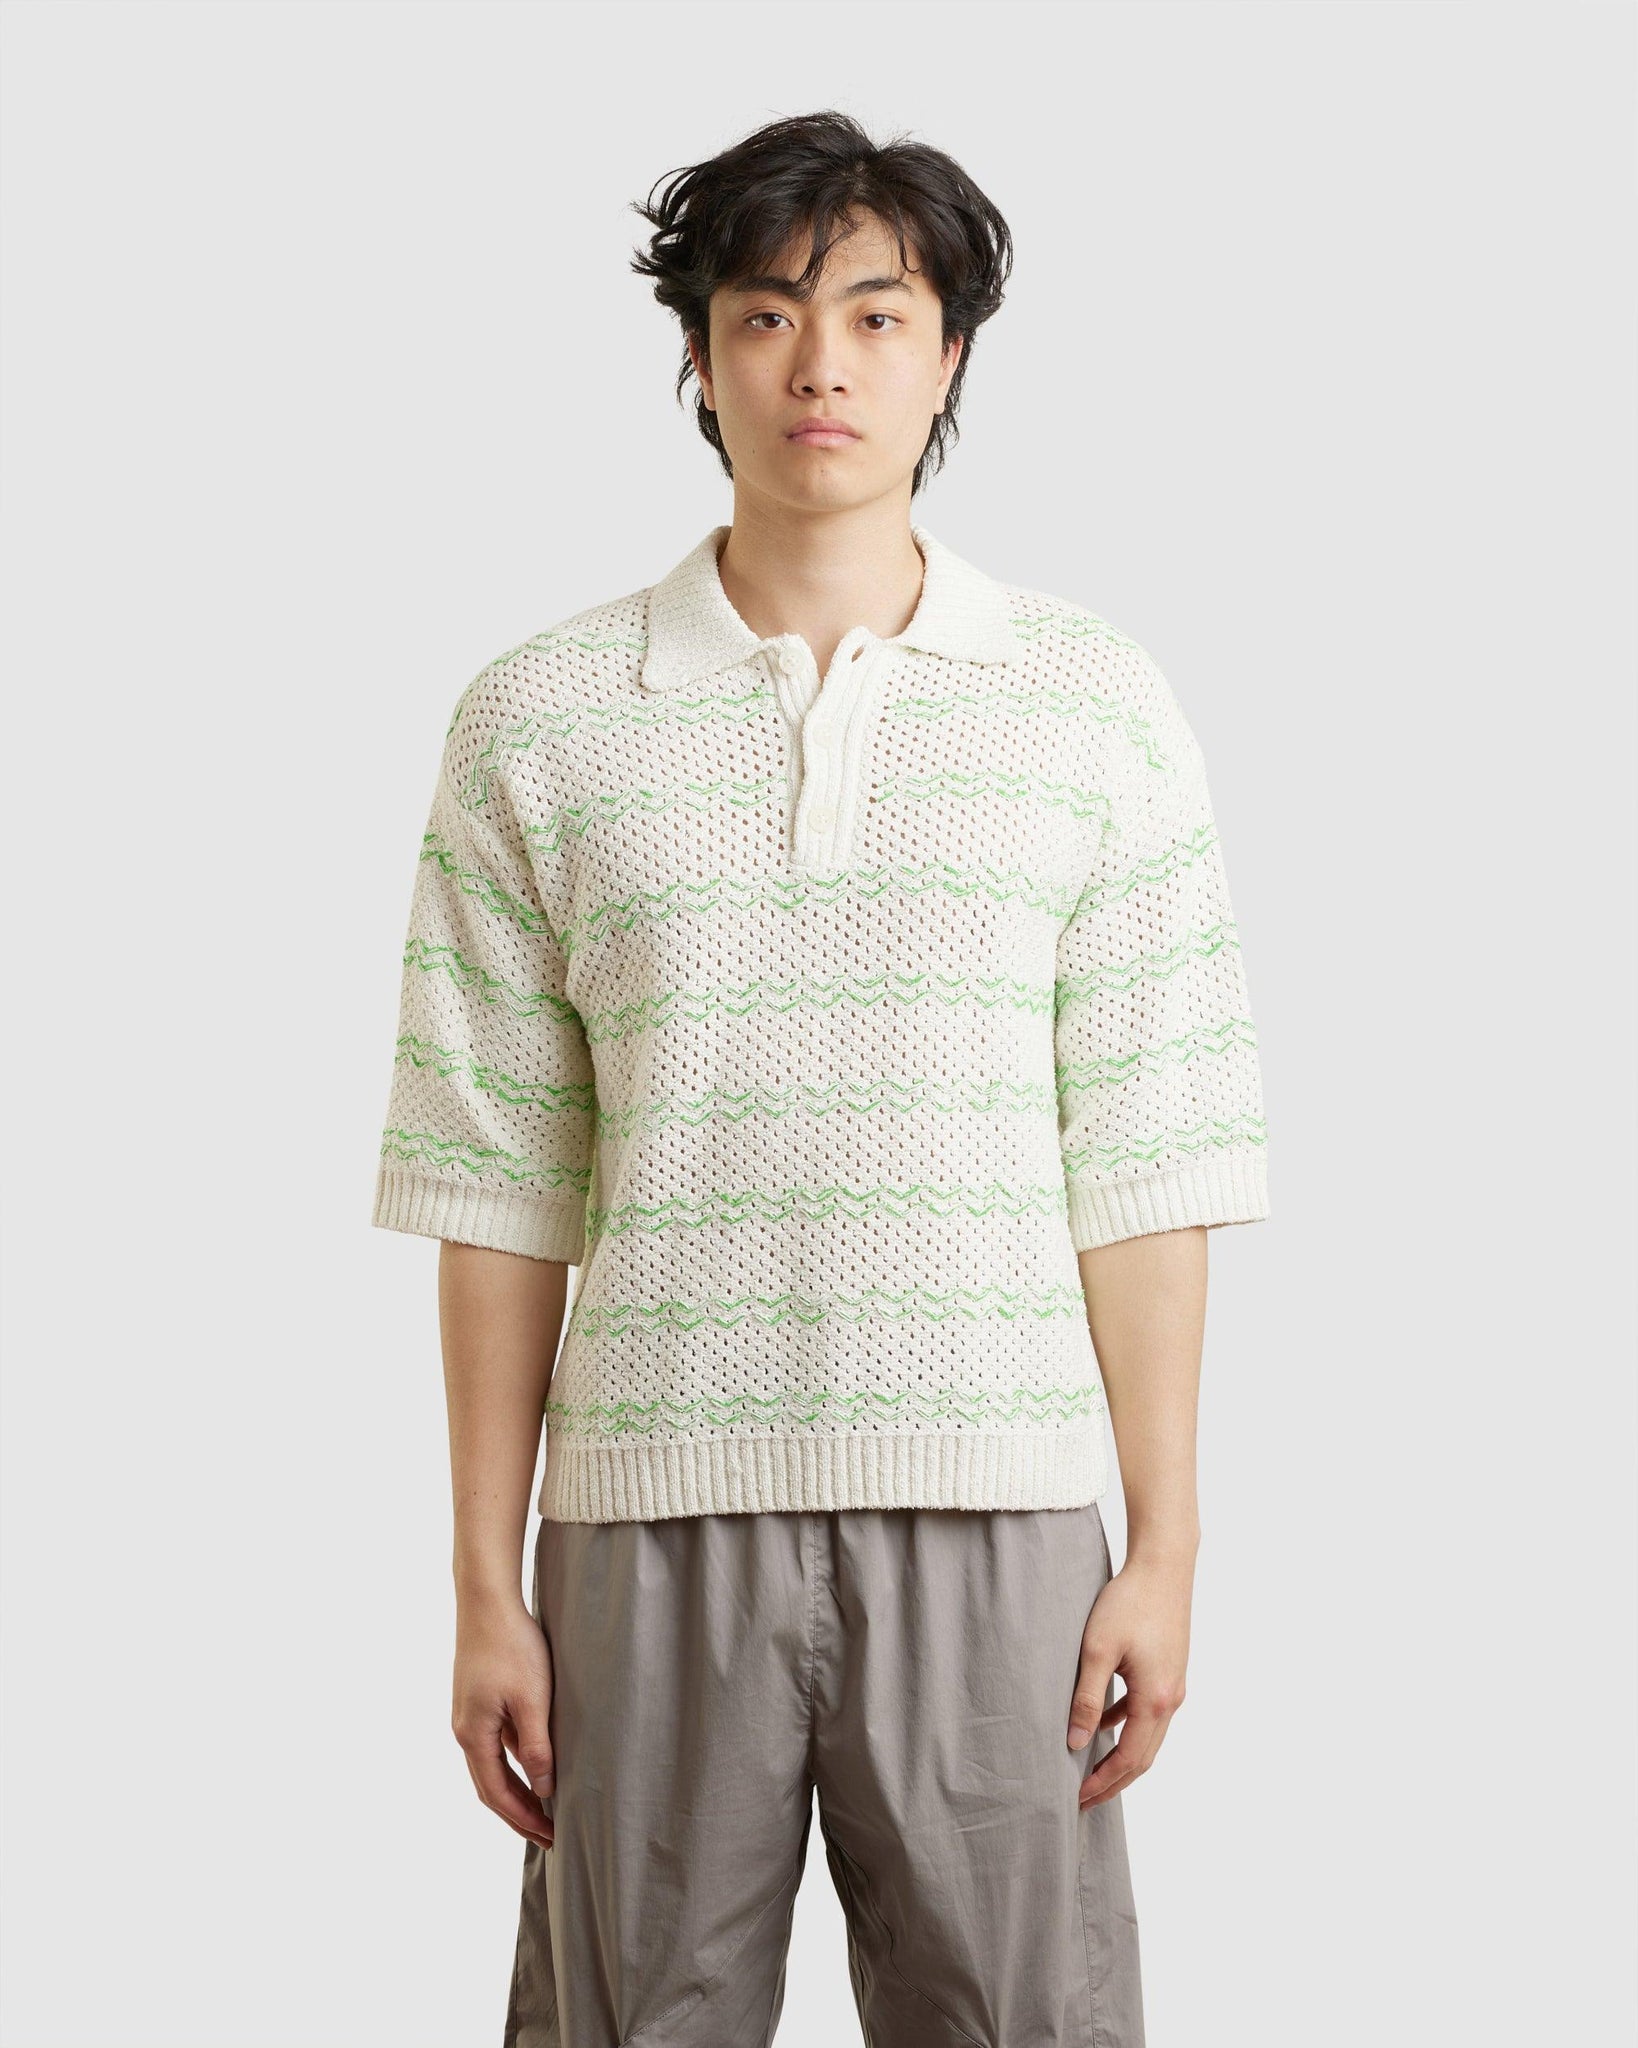 Drift Knit Pique Ecru Mix - {{ collection.title }} - Chinatown Country Club 